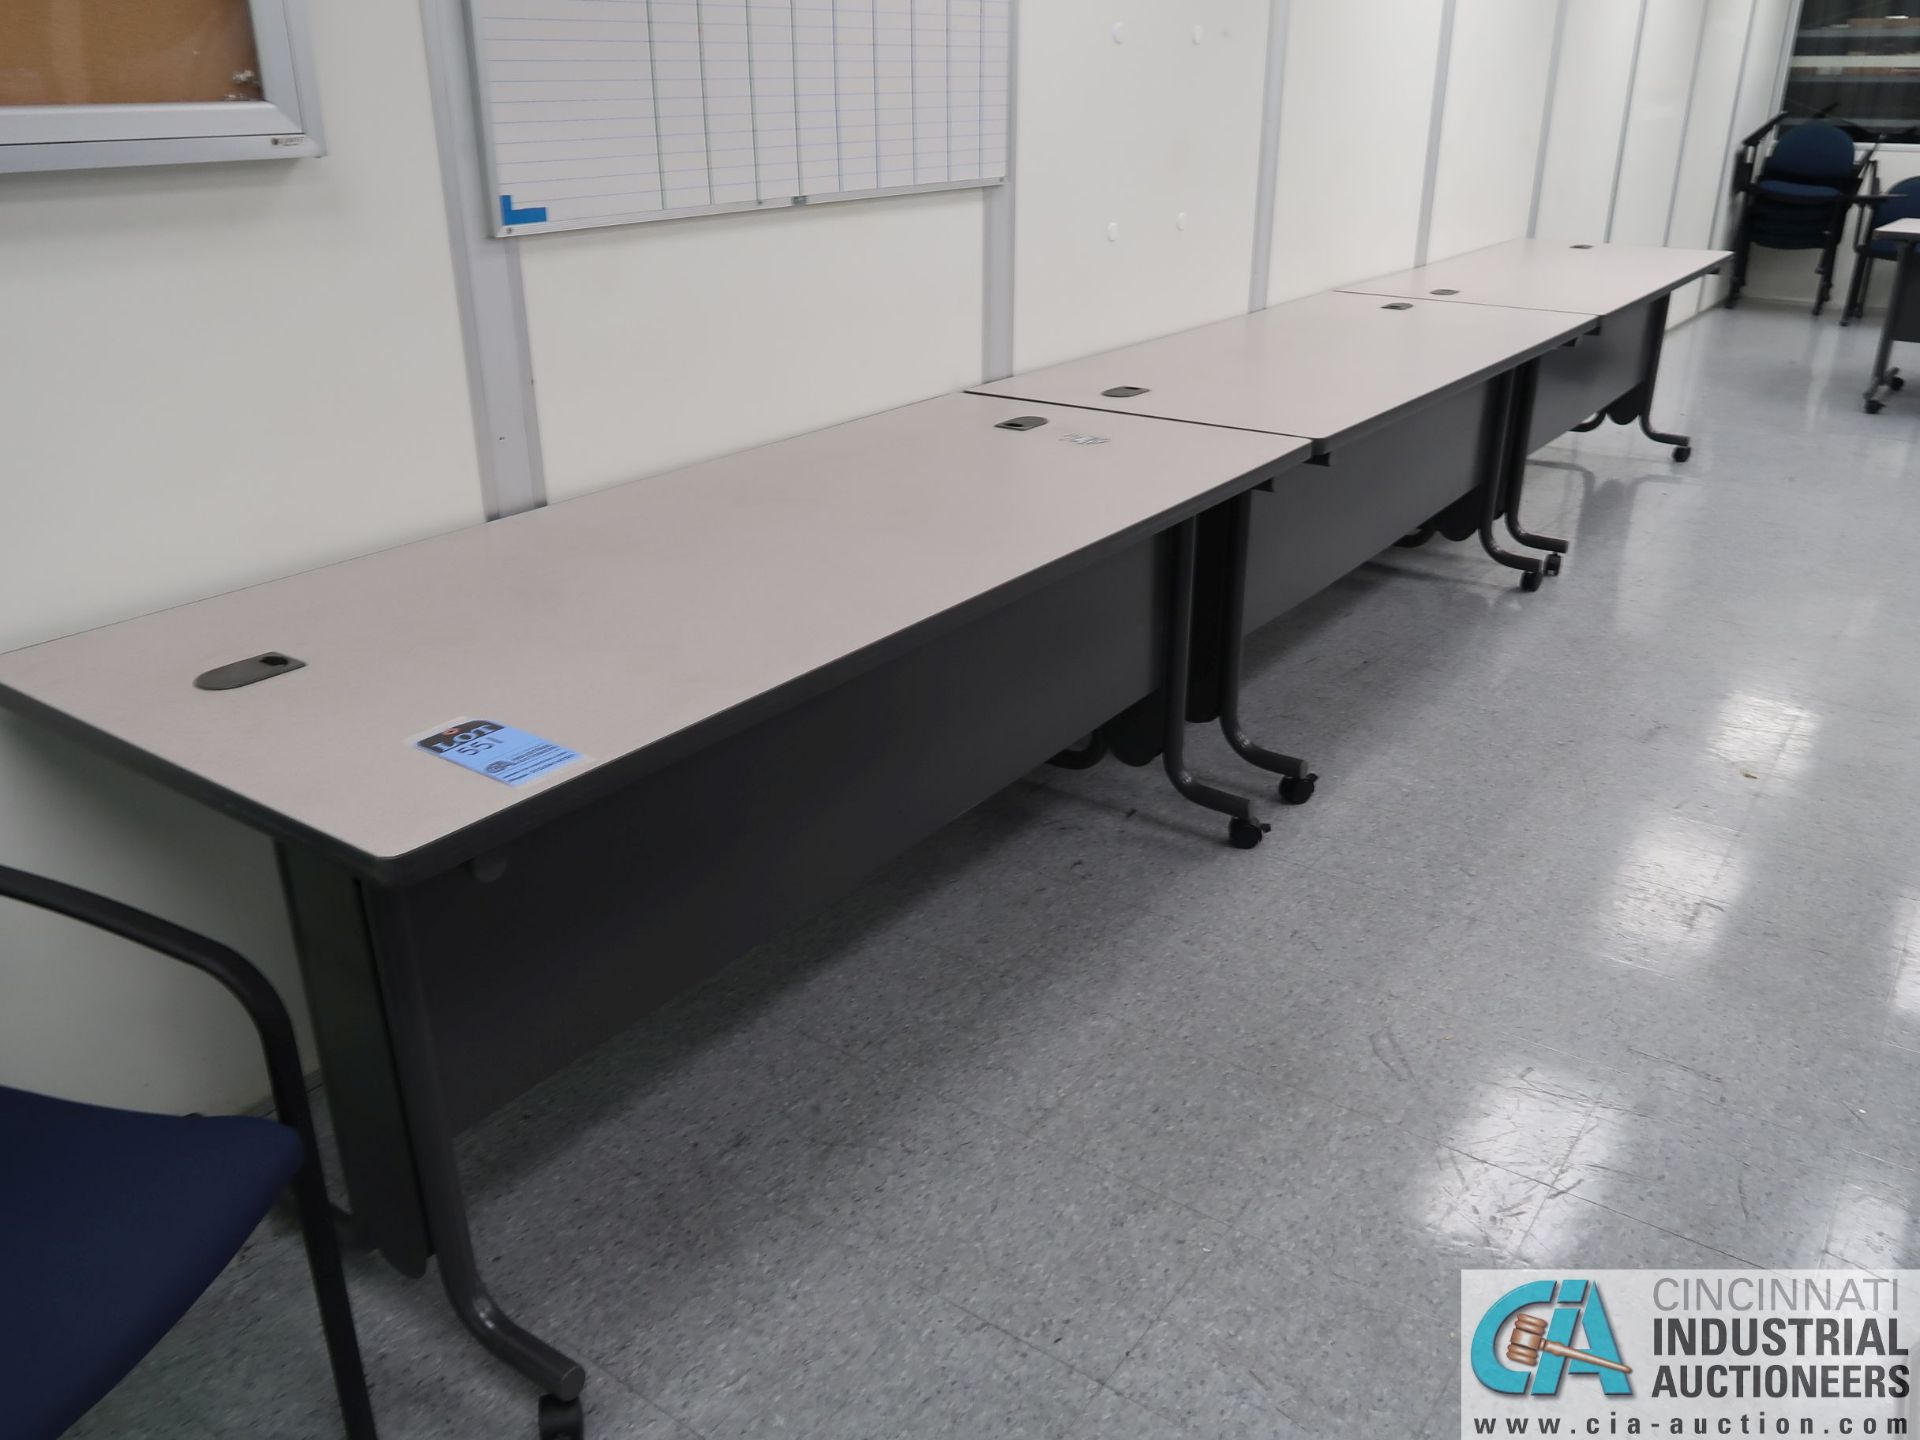 MISCELLANEOUS SIZE LAMINATE TOP TRAINING ROOM TABLES - Image 2 of 3